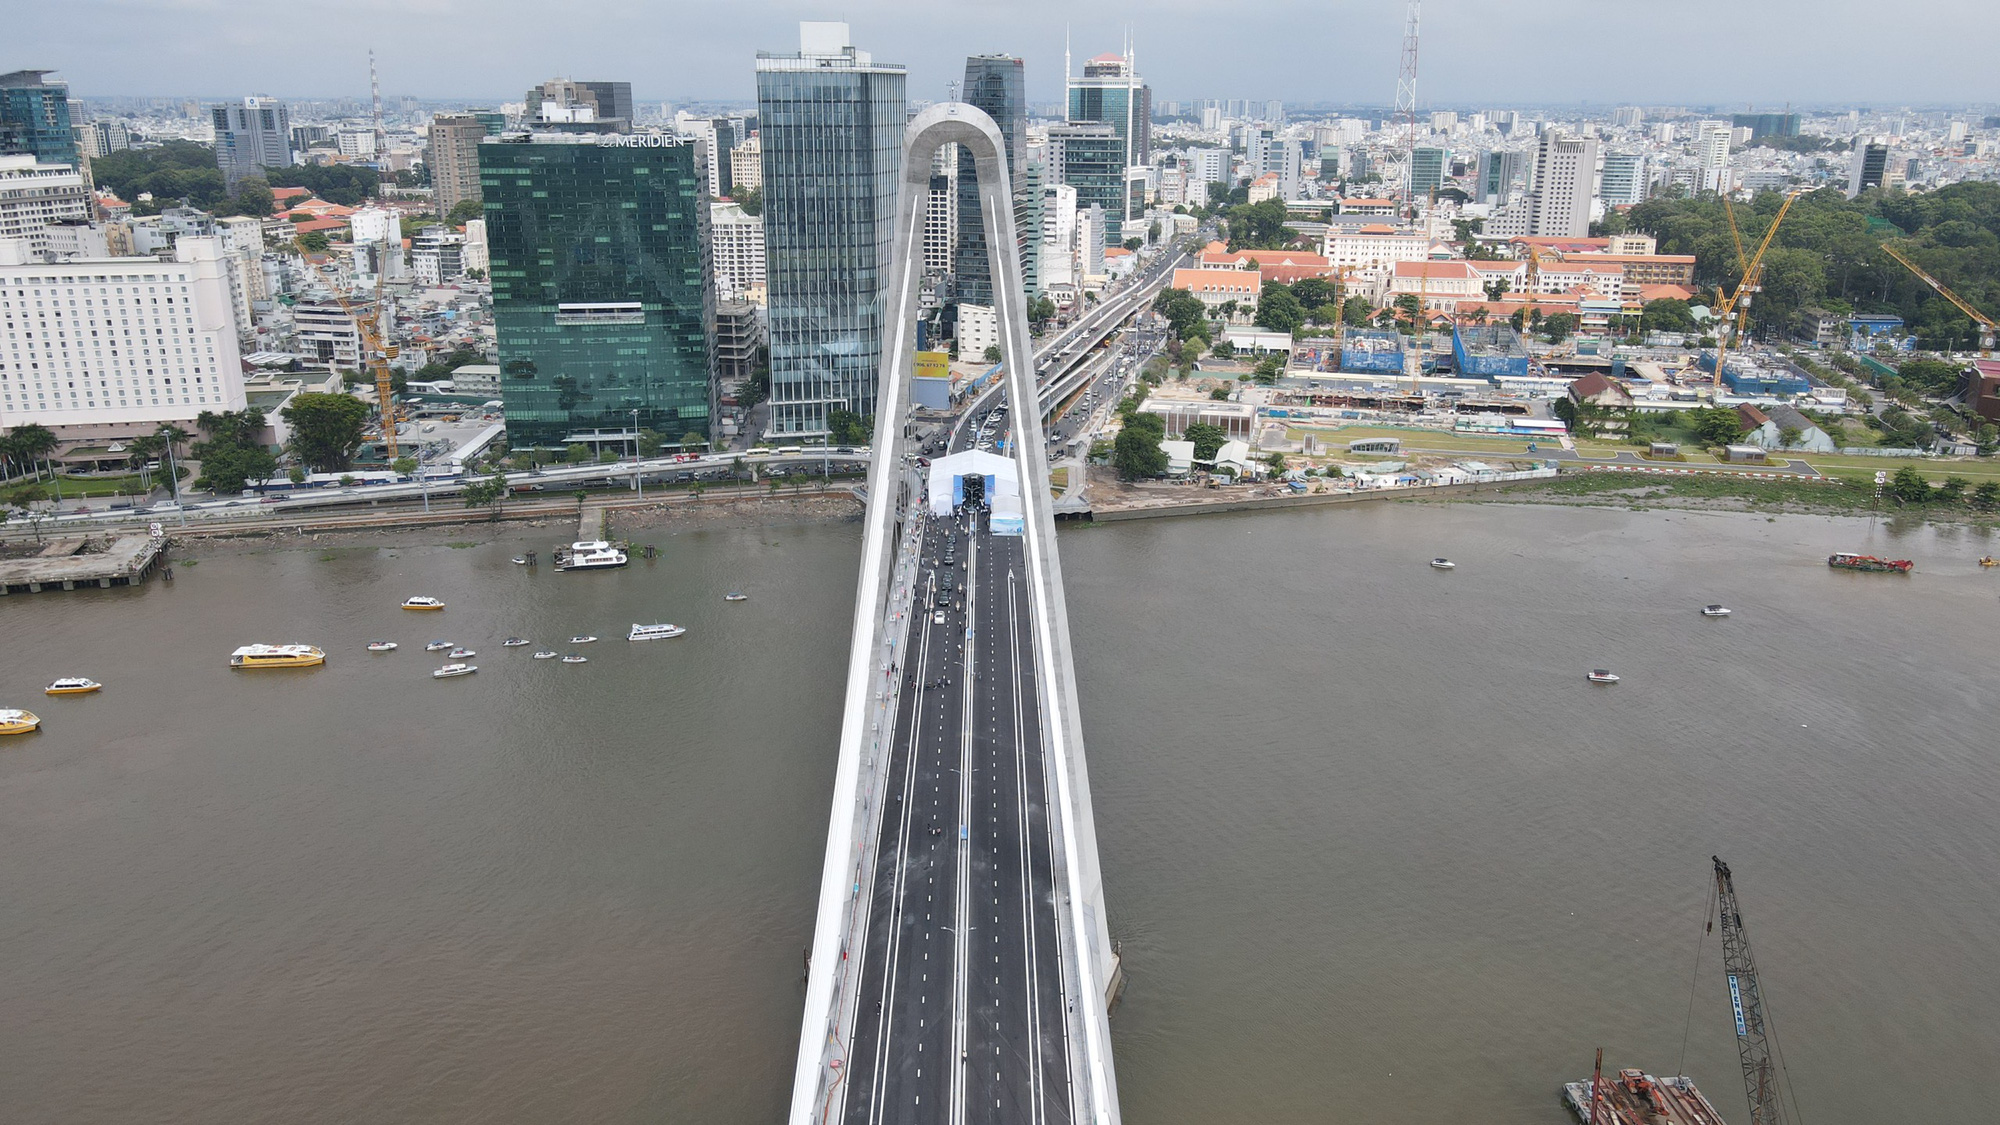 Ho Chi Minh City officially opened Thu Thiem 2 bridge after 7 years of construction - Photo 2.